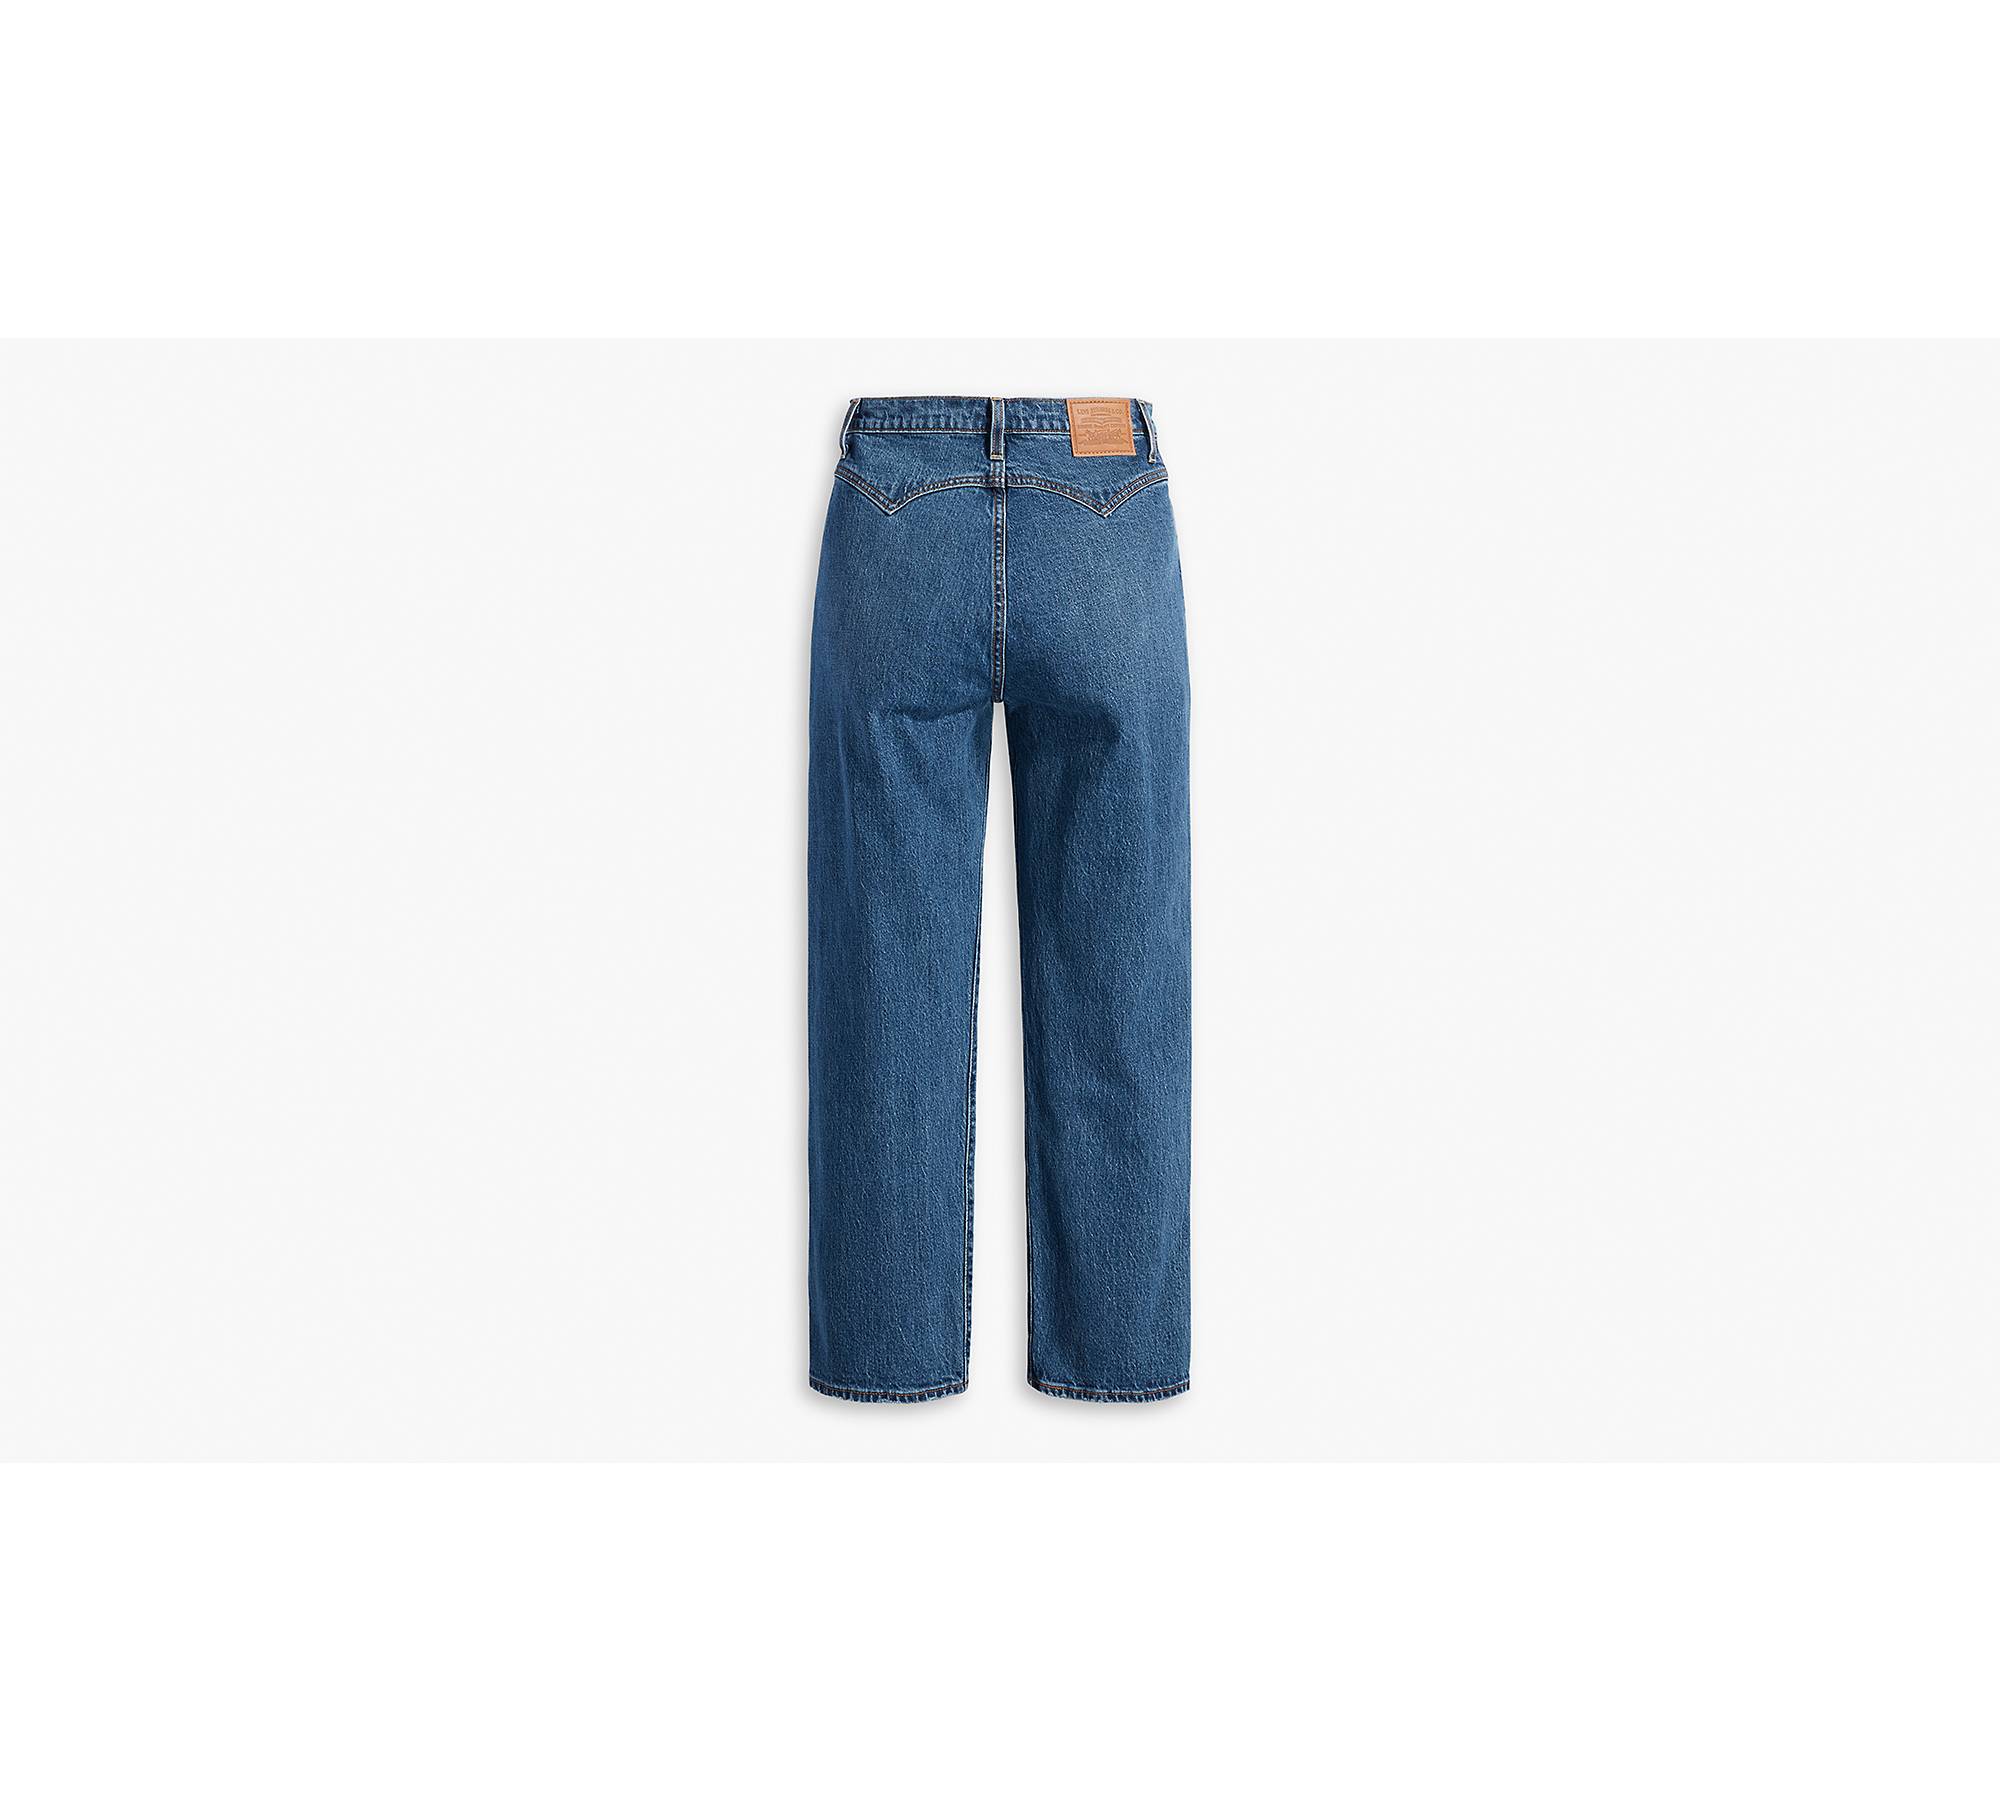 What Is the Small Pocket on Jeans For? Defining Tiny Pocket